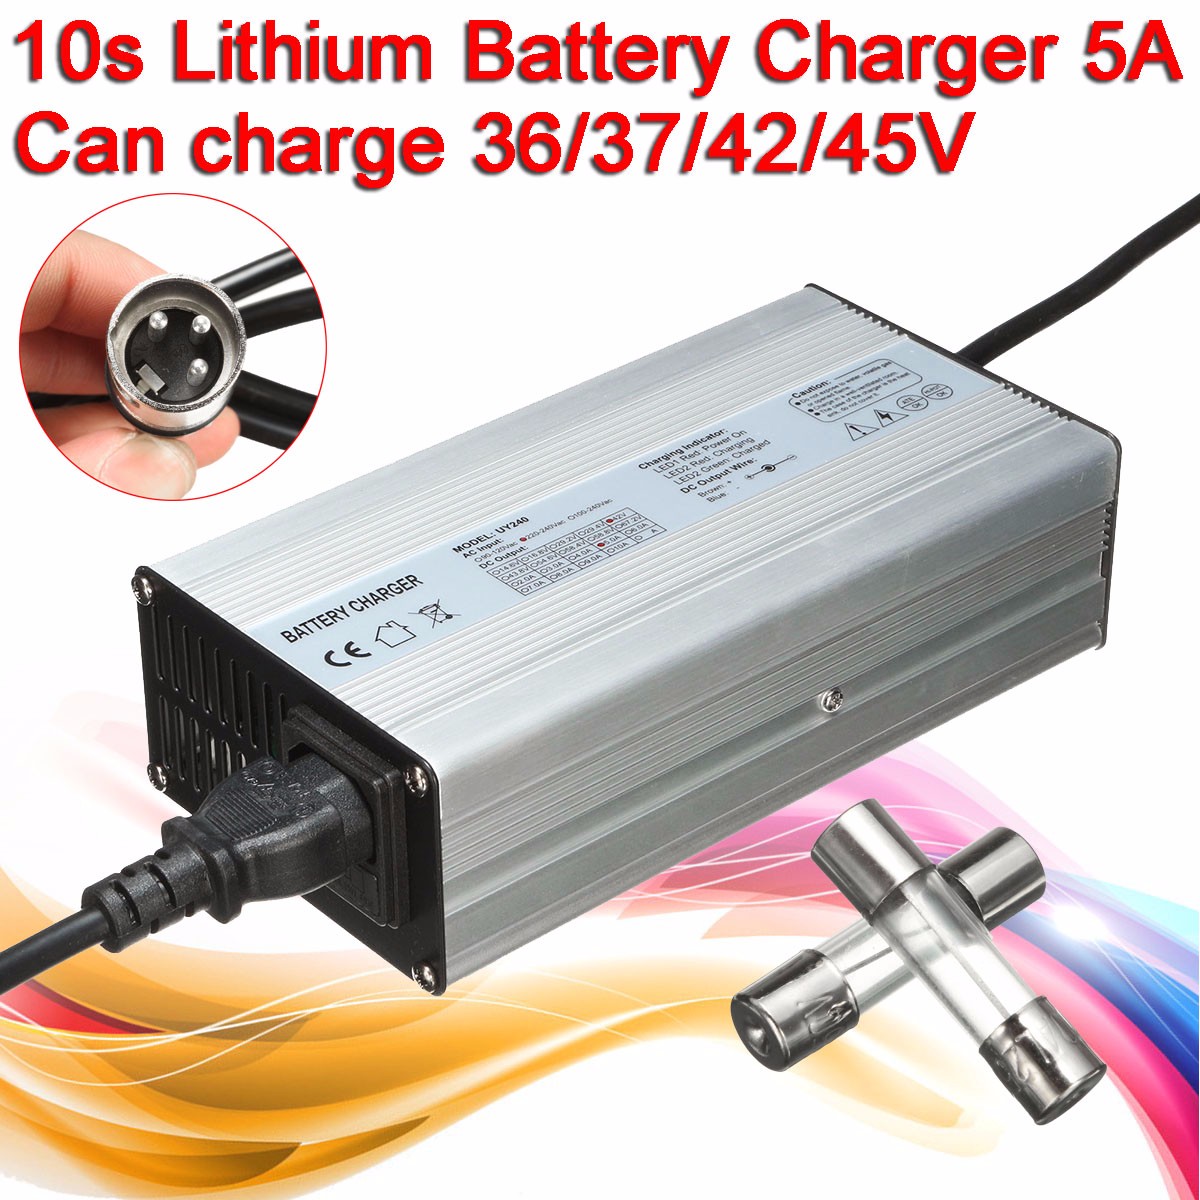 36V-37V-42V-45V-5A-Battery-Charger-For-10s-10x-36V37V-Lithium-Li-ion-Battery-1115729